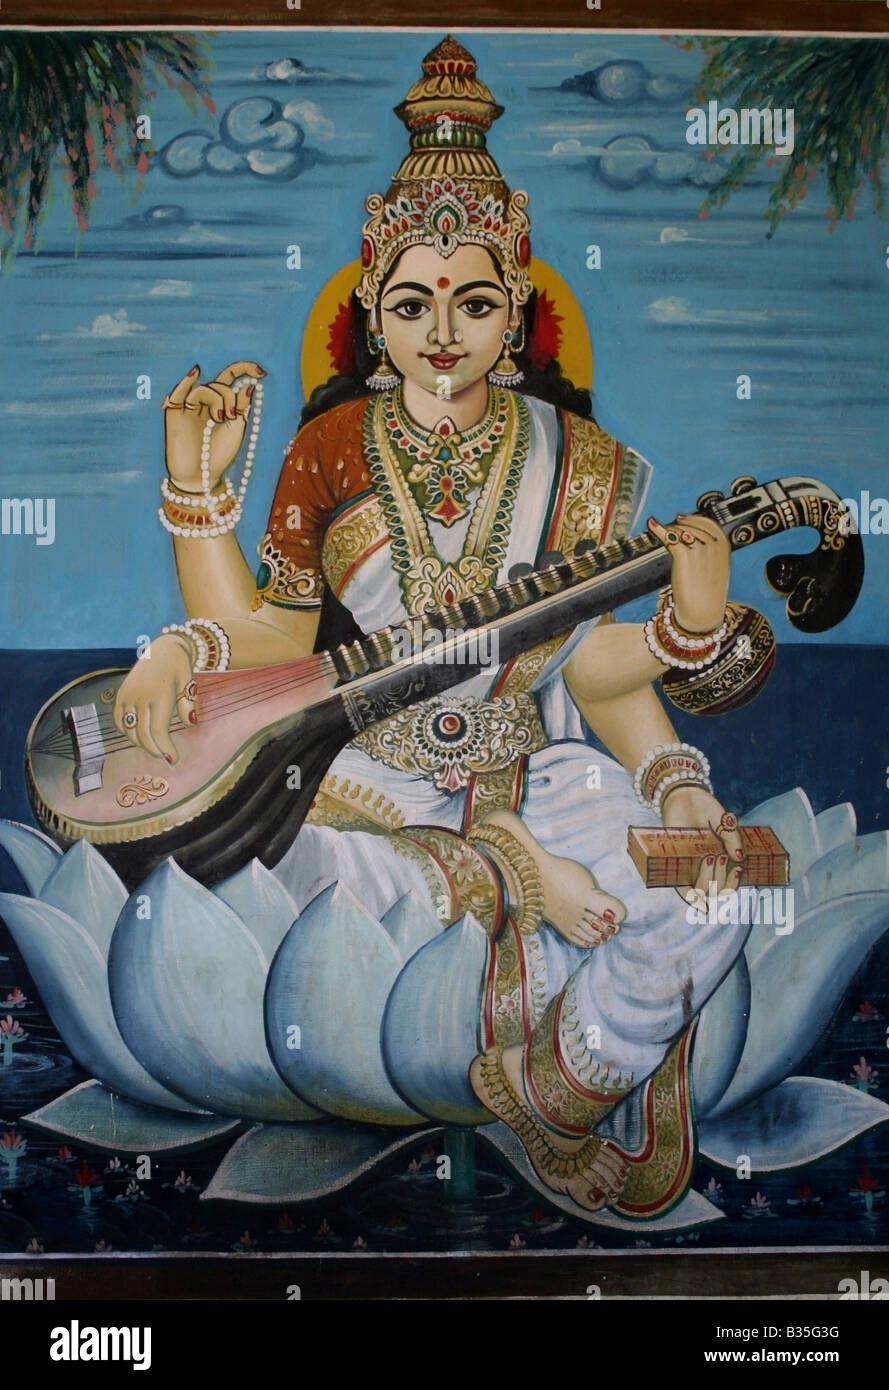 Painting of the Hindu Goddess of arts and knowledge Saraswati at a temple in India Stock Photo